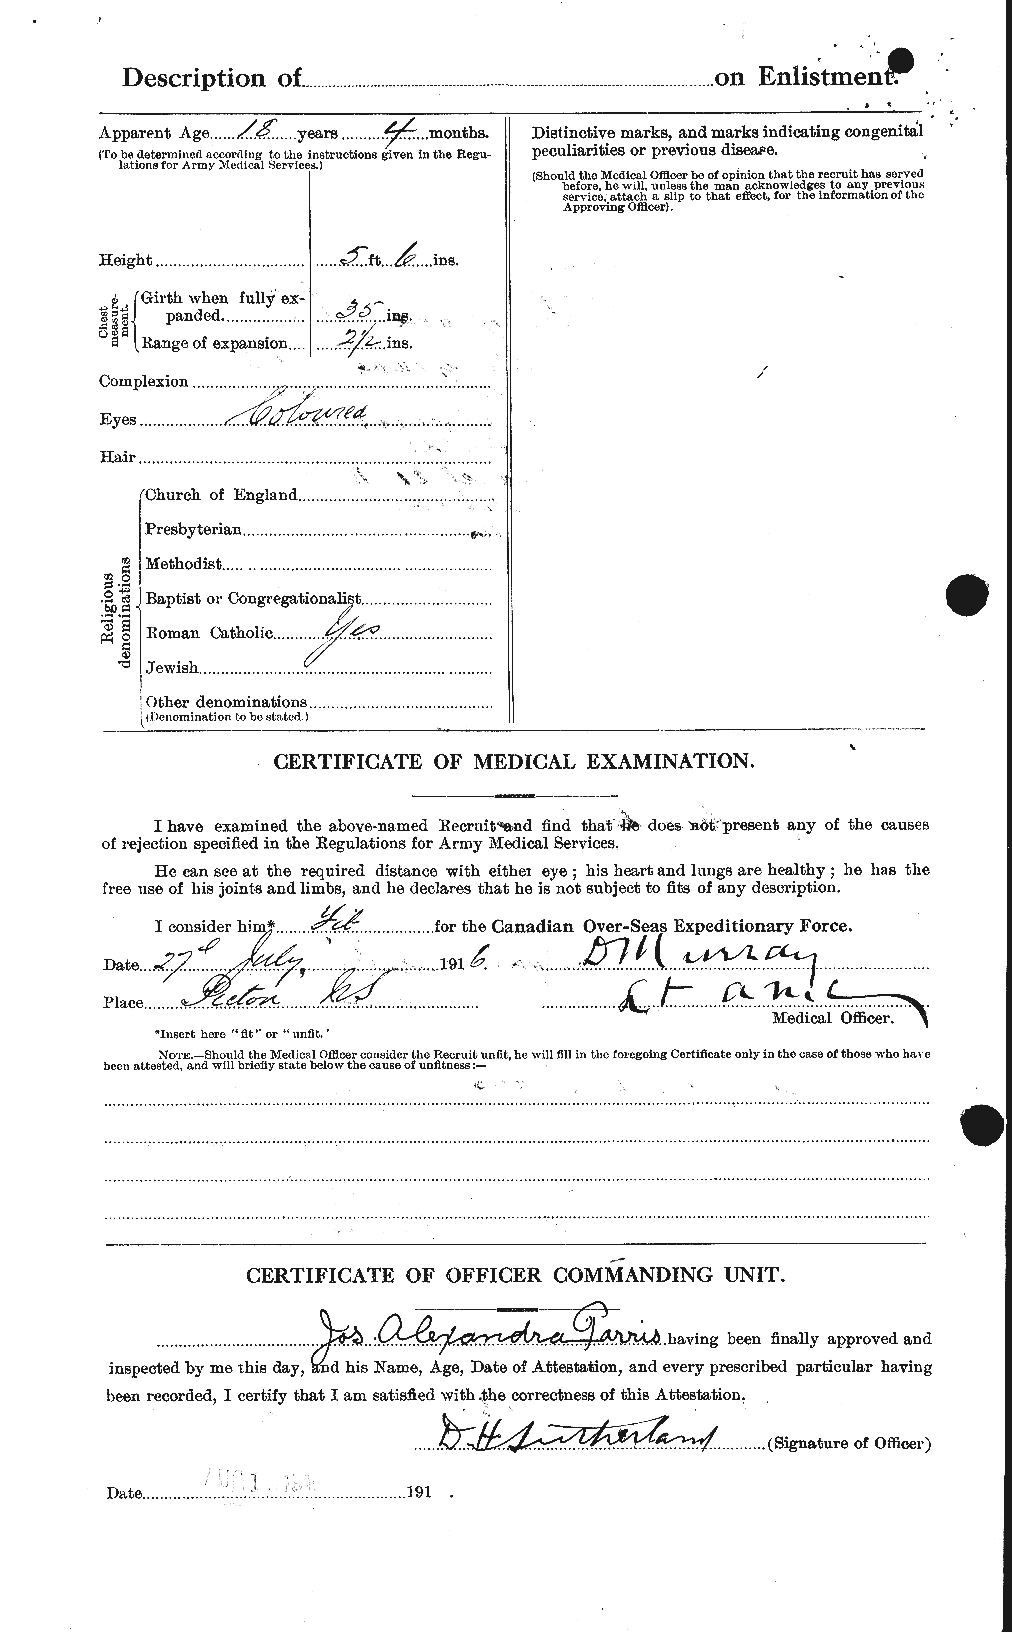 Personnel Records of the First World War - CEF 566511b